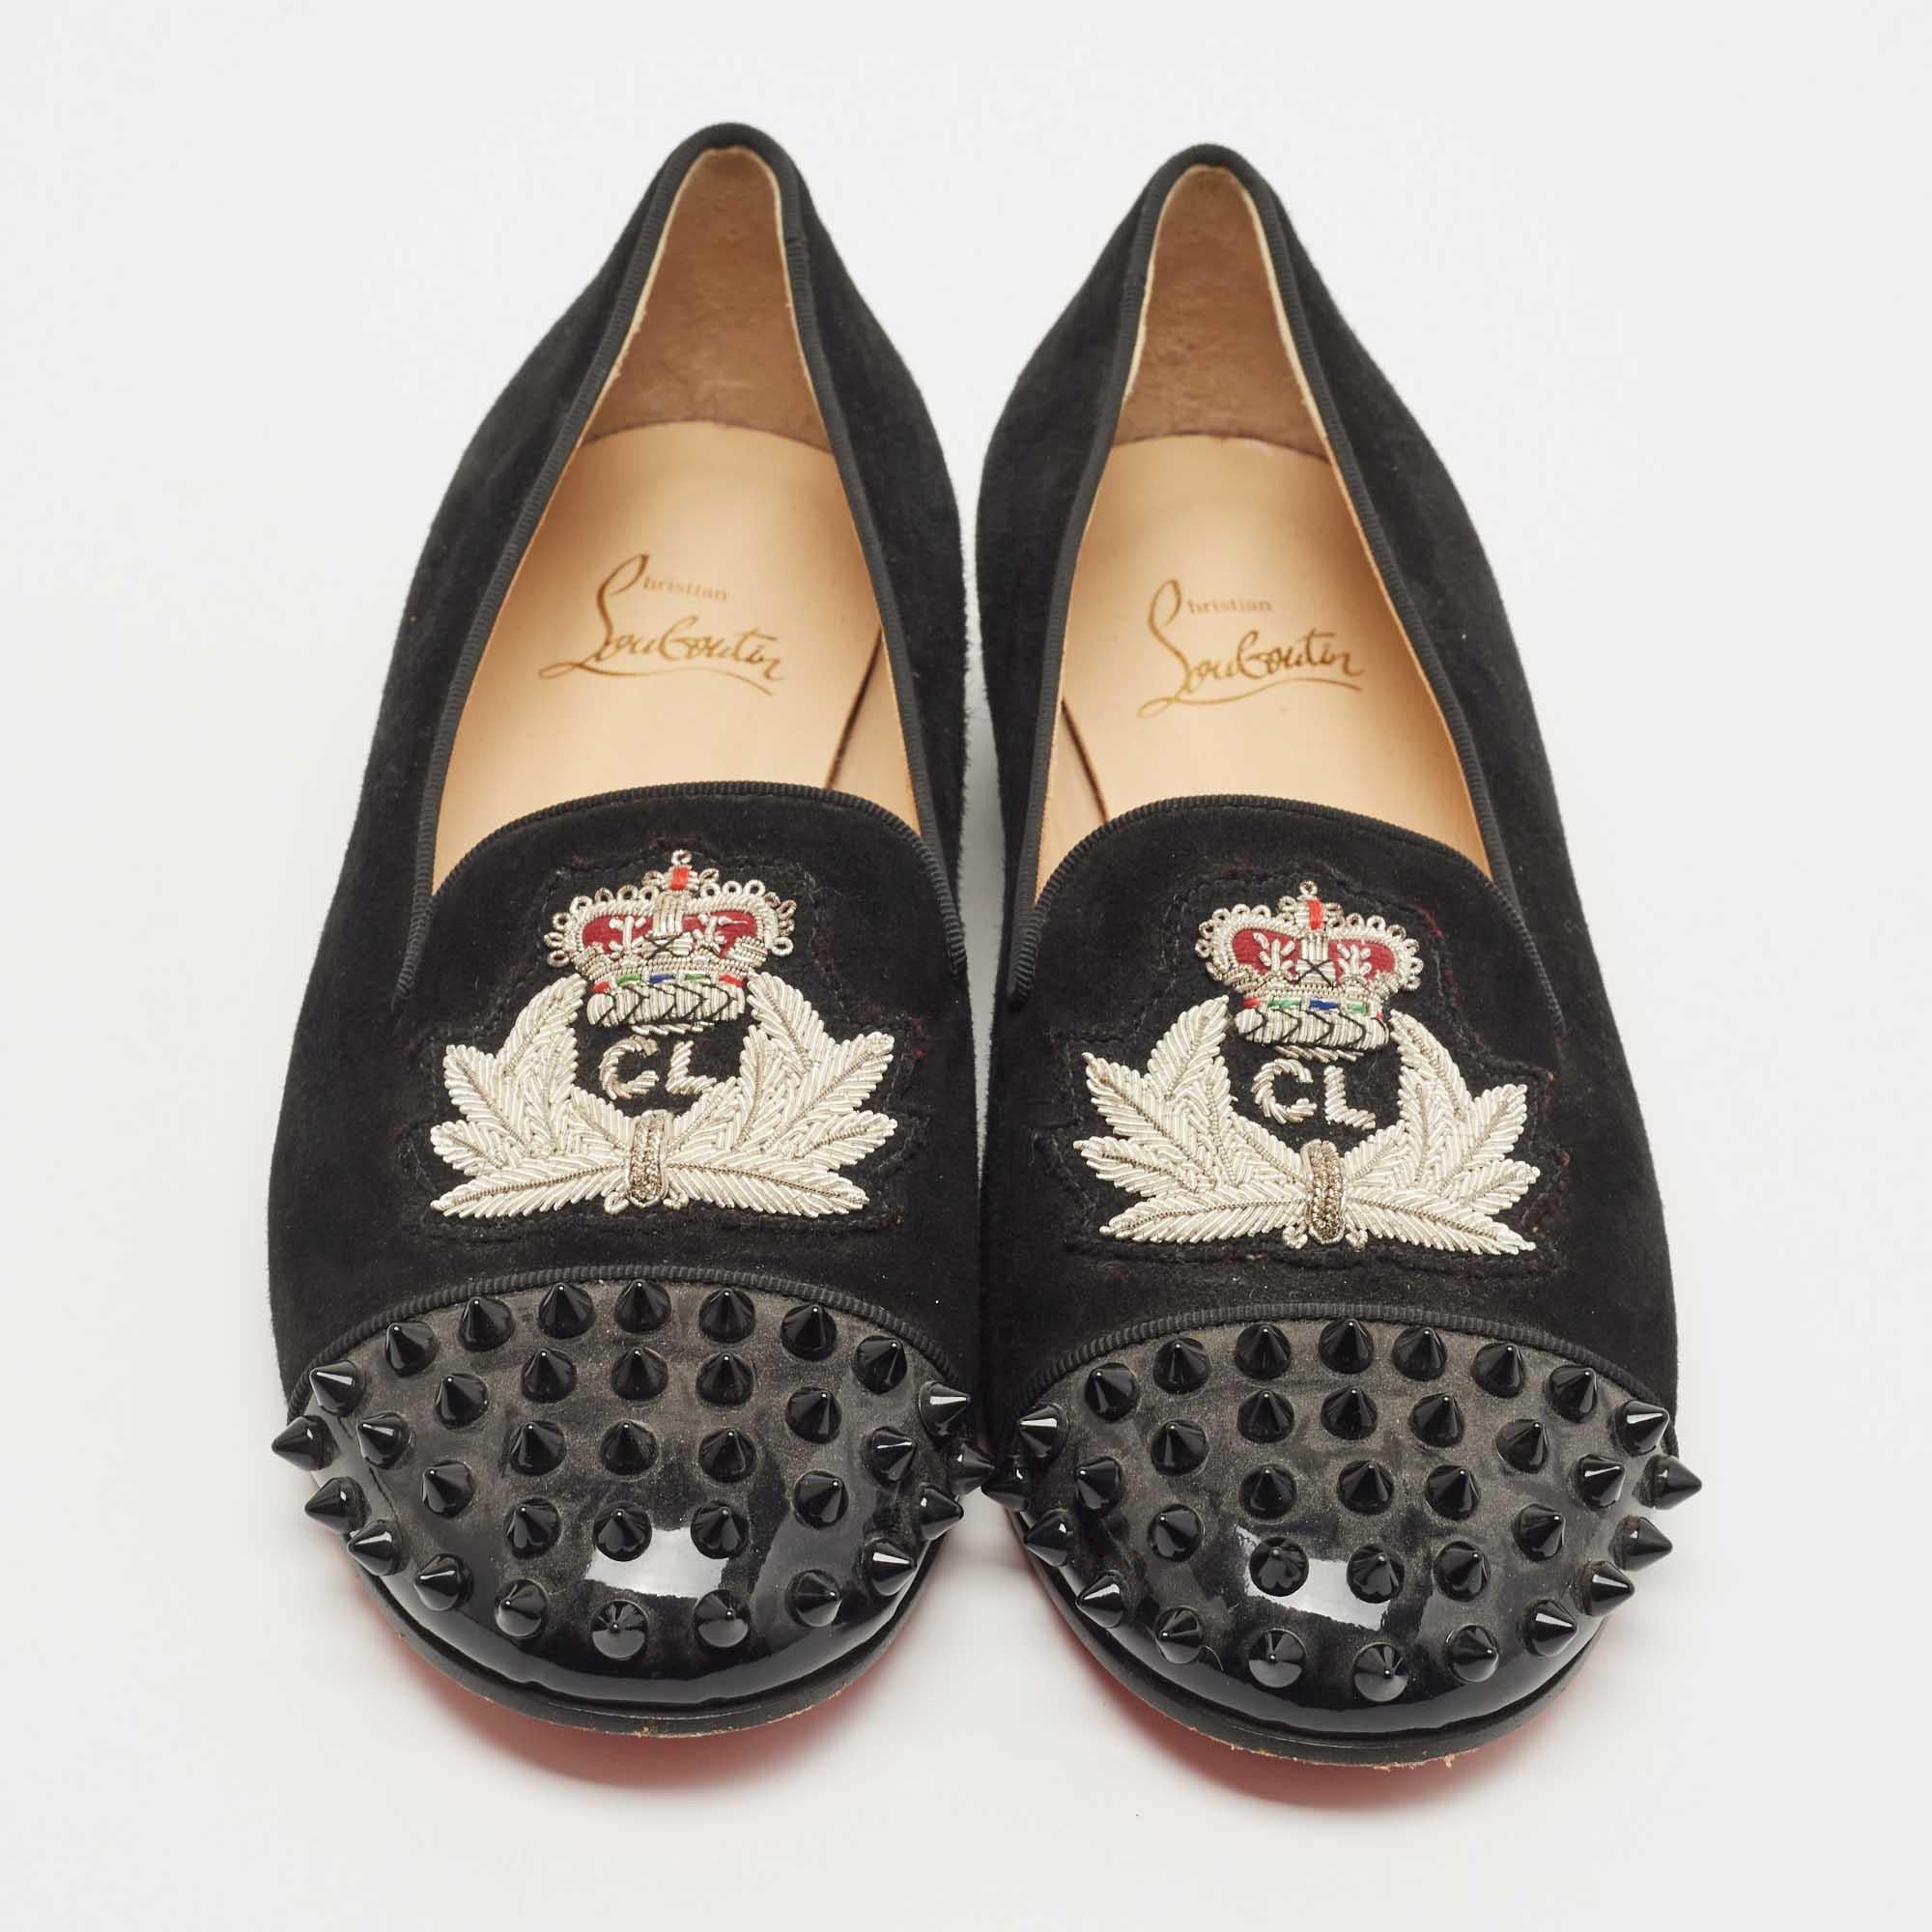 Women's Christian Louboutin Black Suede Harvanana Spiked Smoking Slippers Size 36.5 For Sale